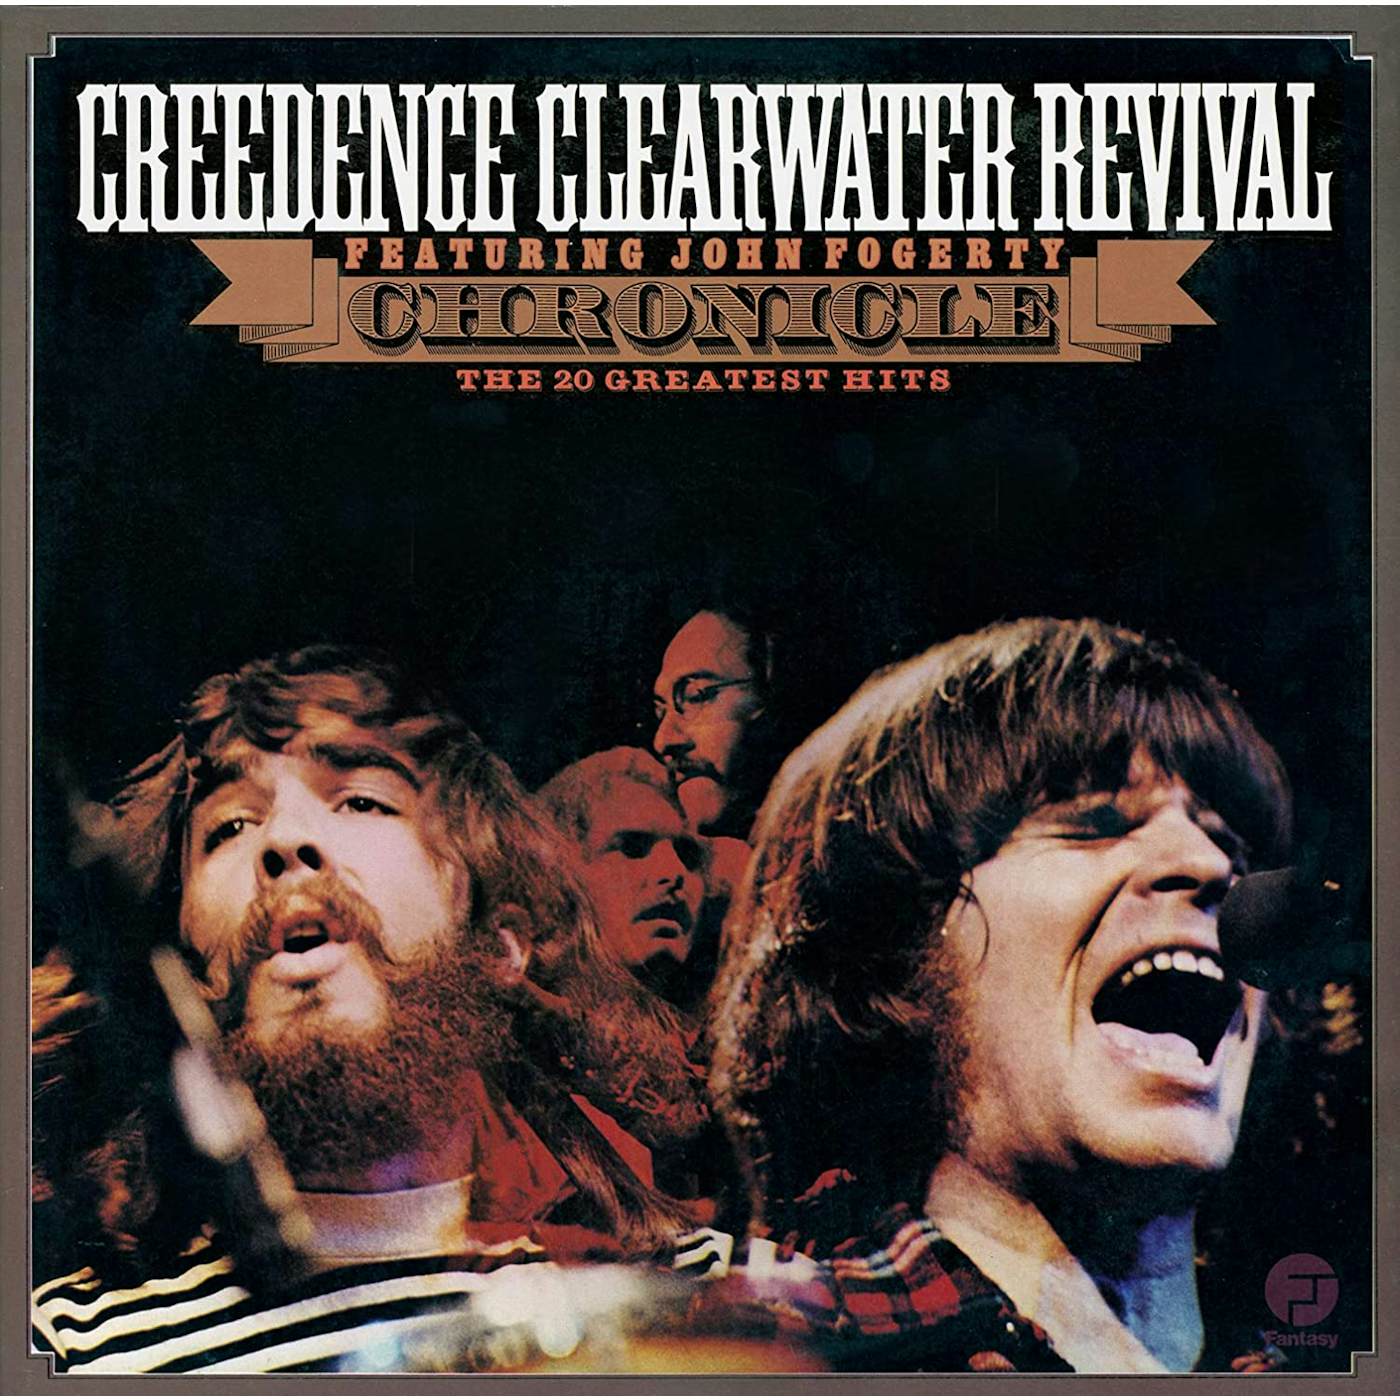 Creedence Clearwater Revival - Chronicles - The 20 Greatest Hits